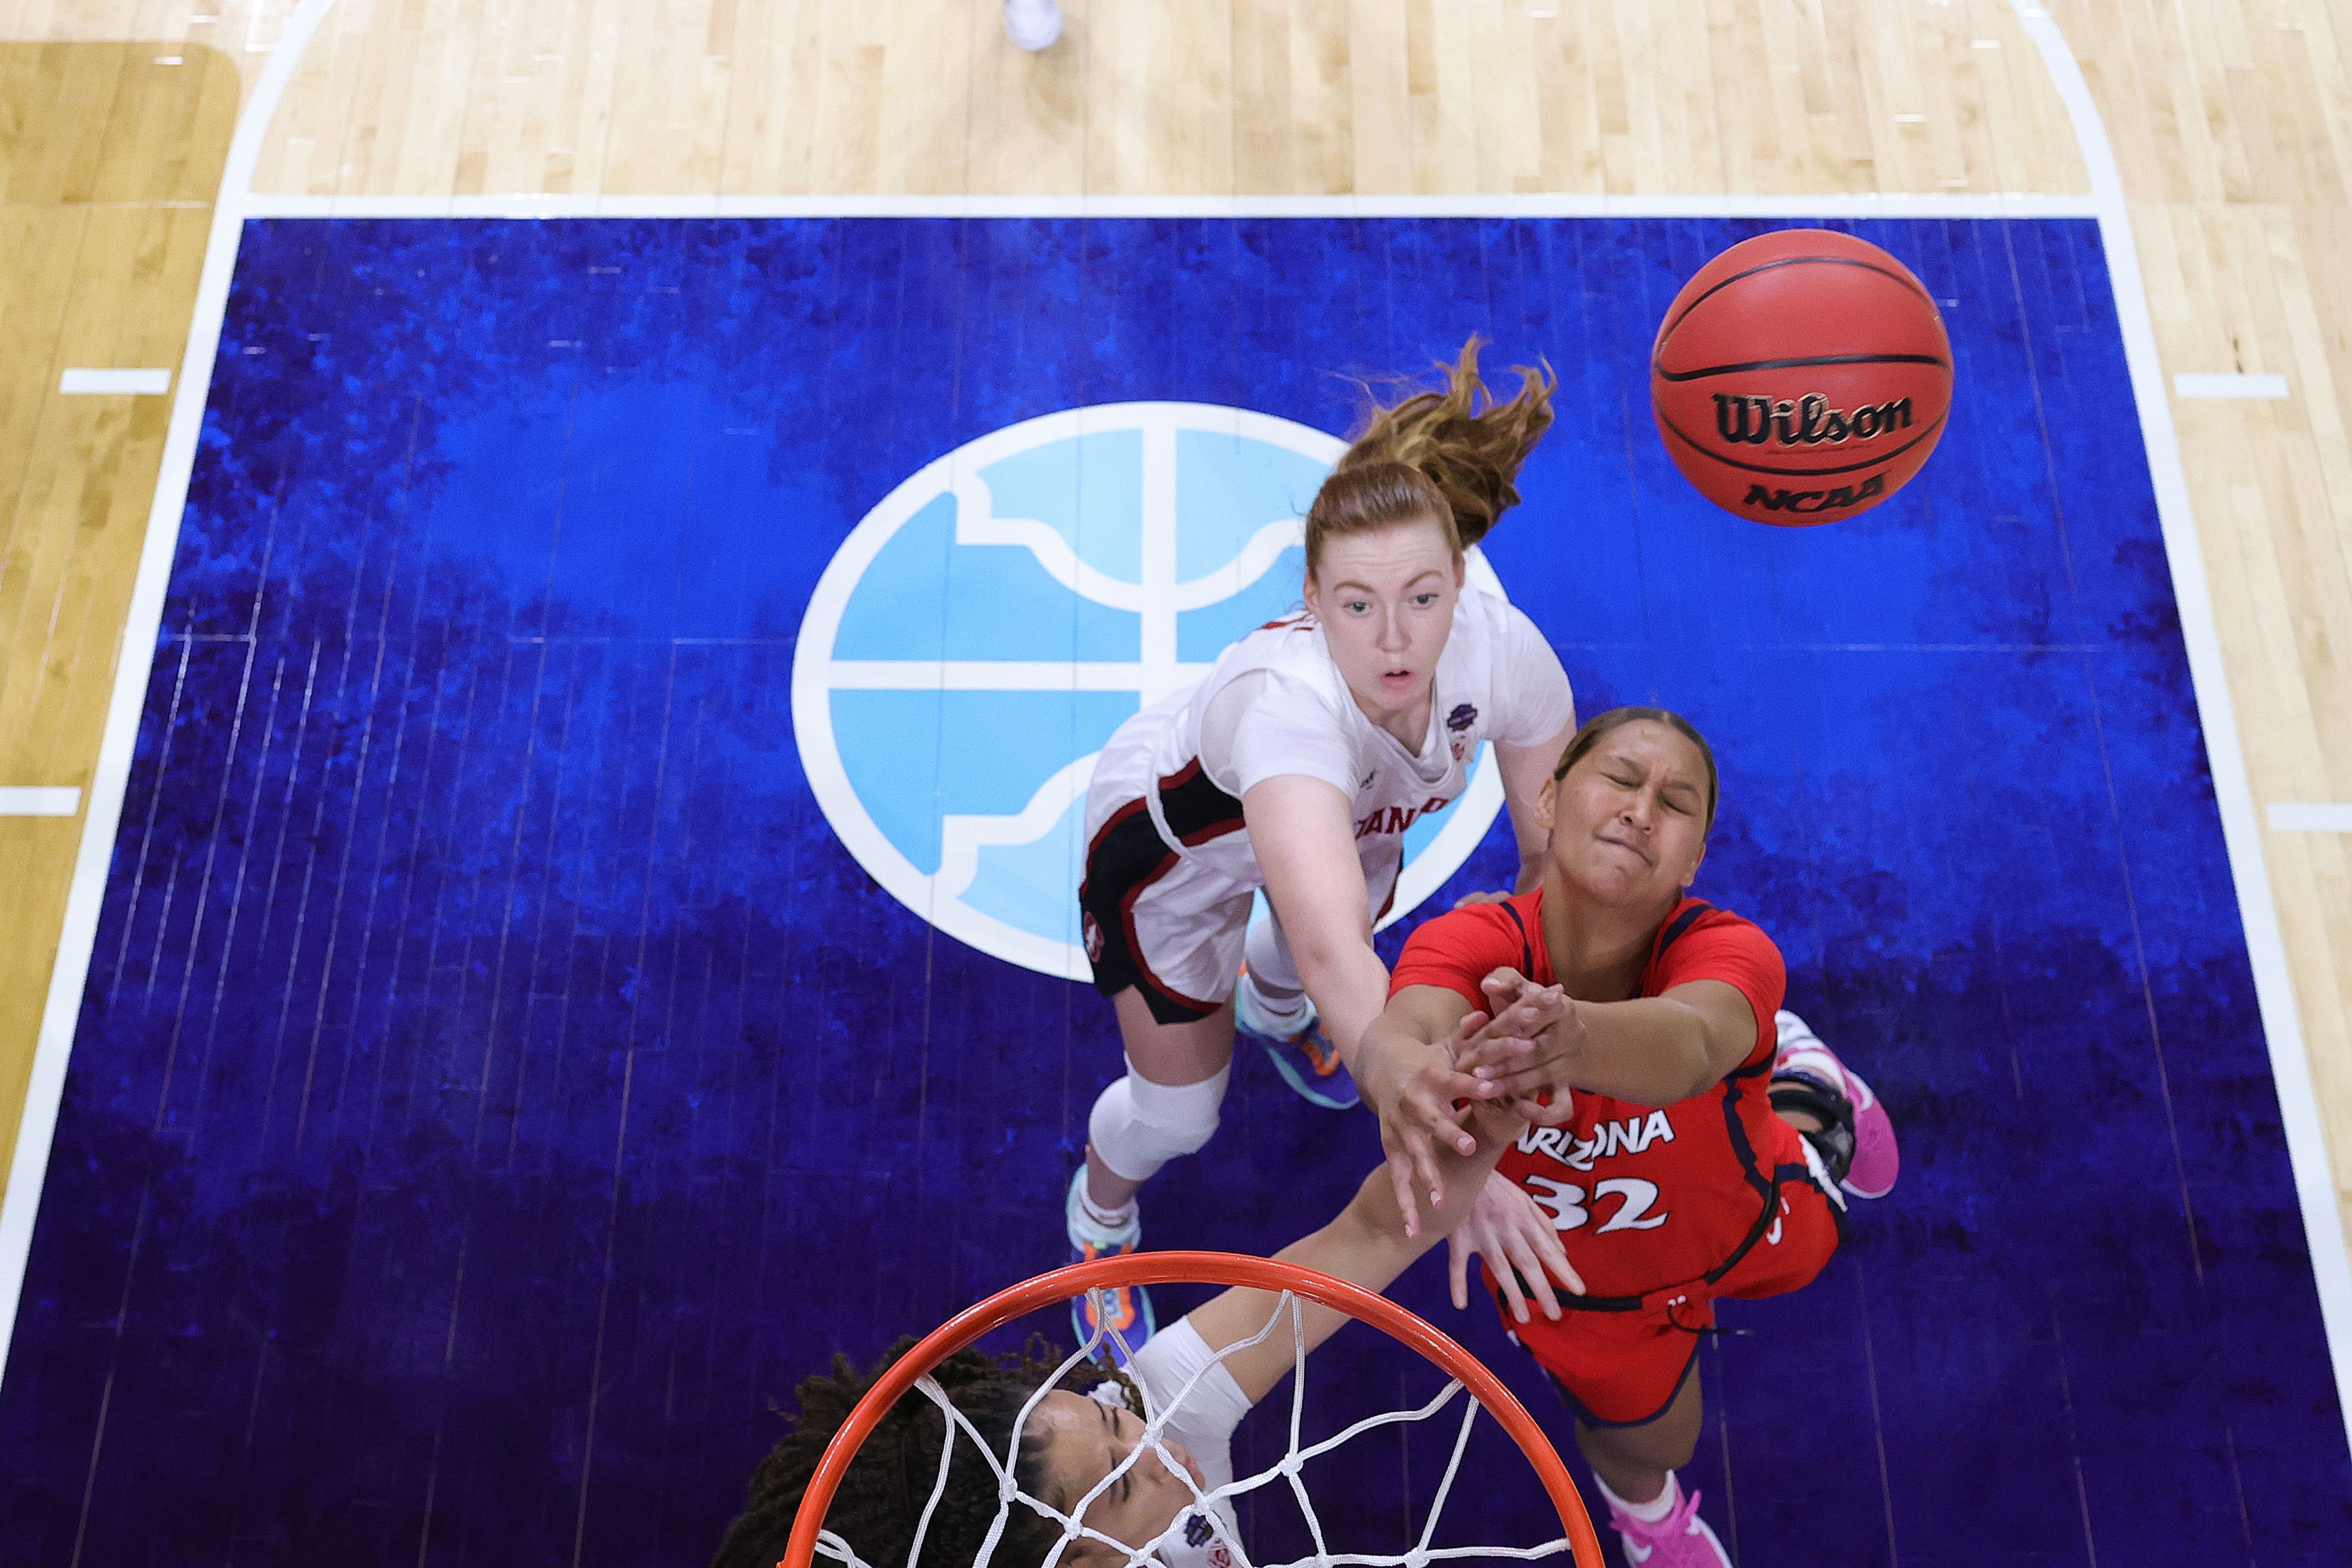 Lauren Ware #32 of the Arizona Wildcats is pressured by Haley Jones #30 #10 of the Stanford Cardinal in the National Championship game